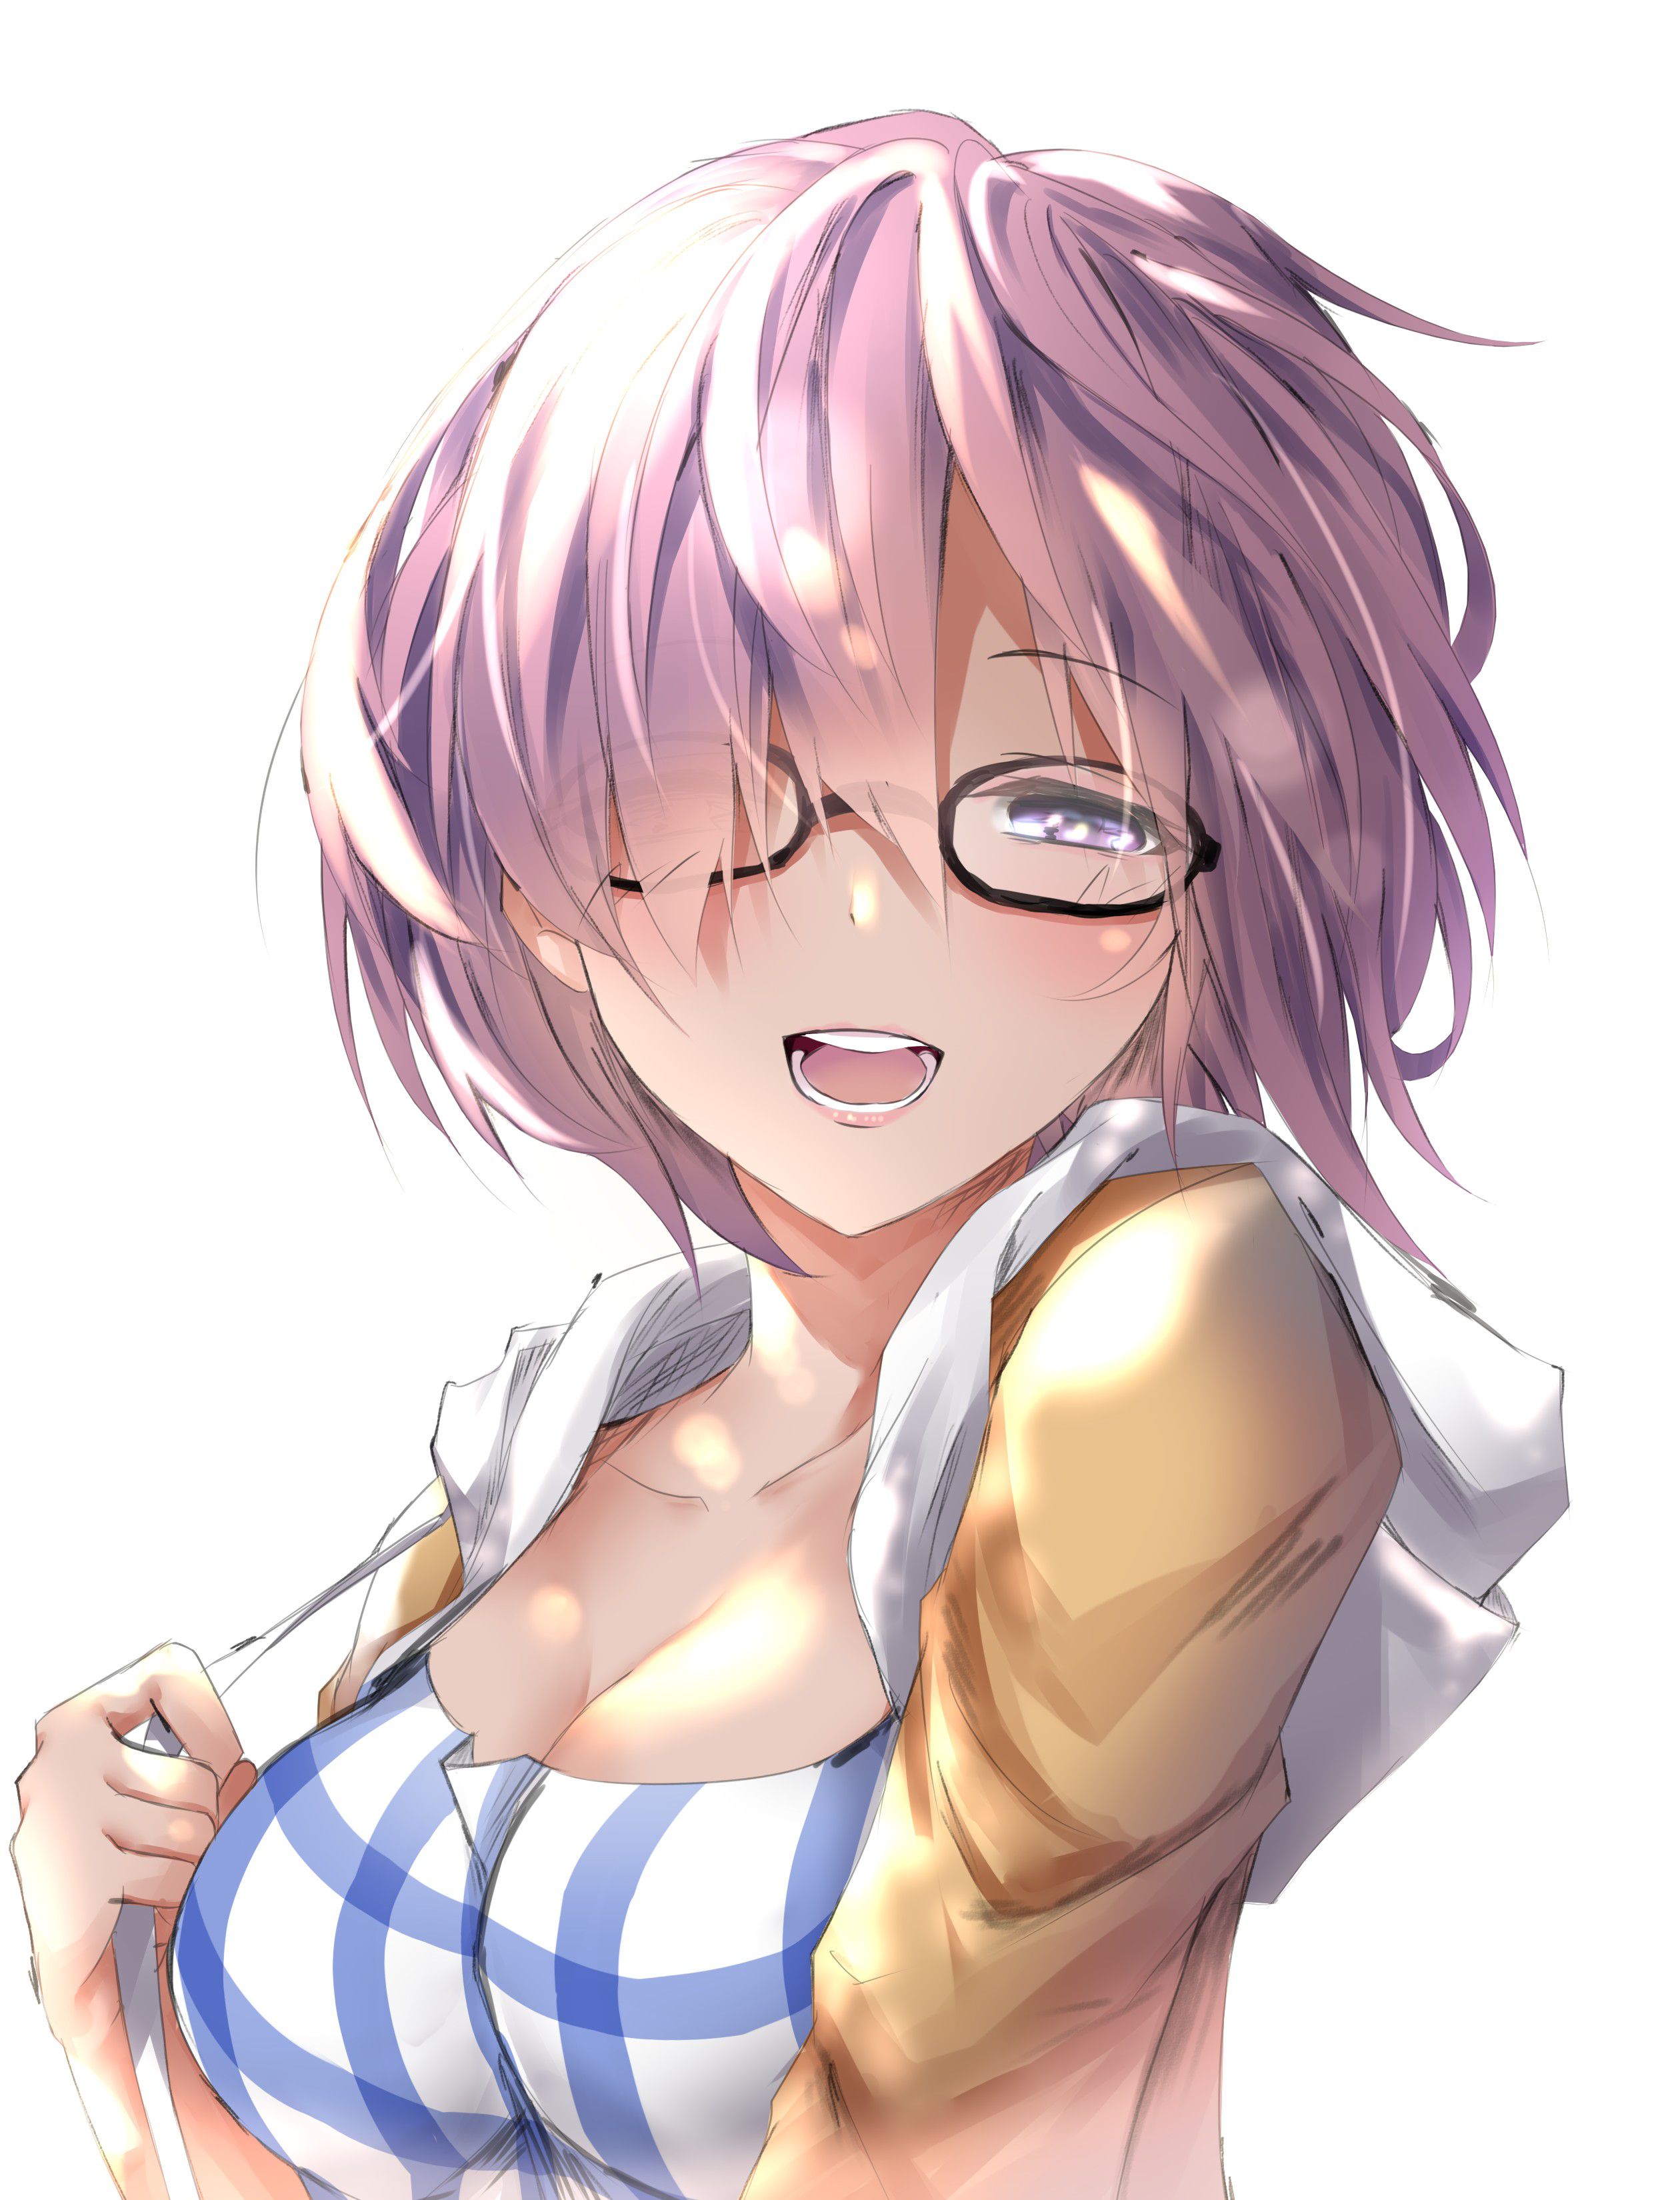 [2nd] Cute Glasses Daughter Secondary Image Part 45 [Glasses Daughter Non-Erotic] 12